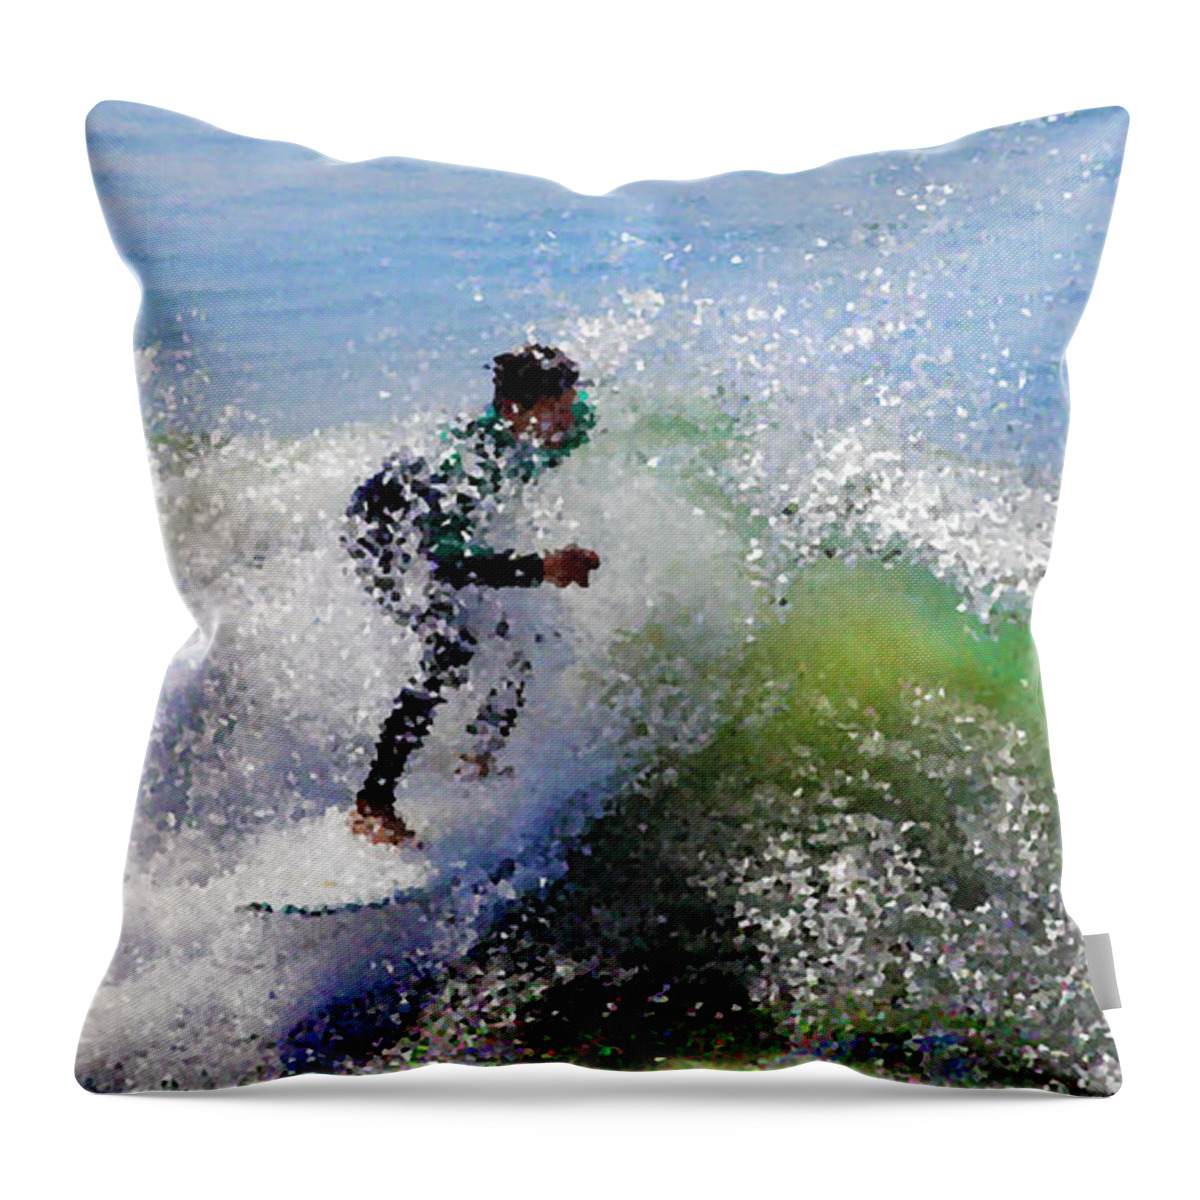 Mosaic Throw Pillow featuring the photograph Surfer 2 by Nicholas Burningham